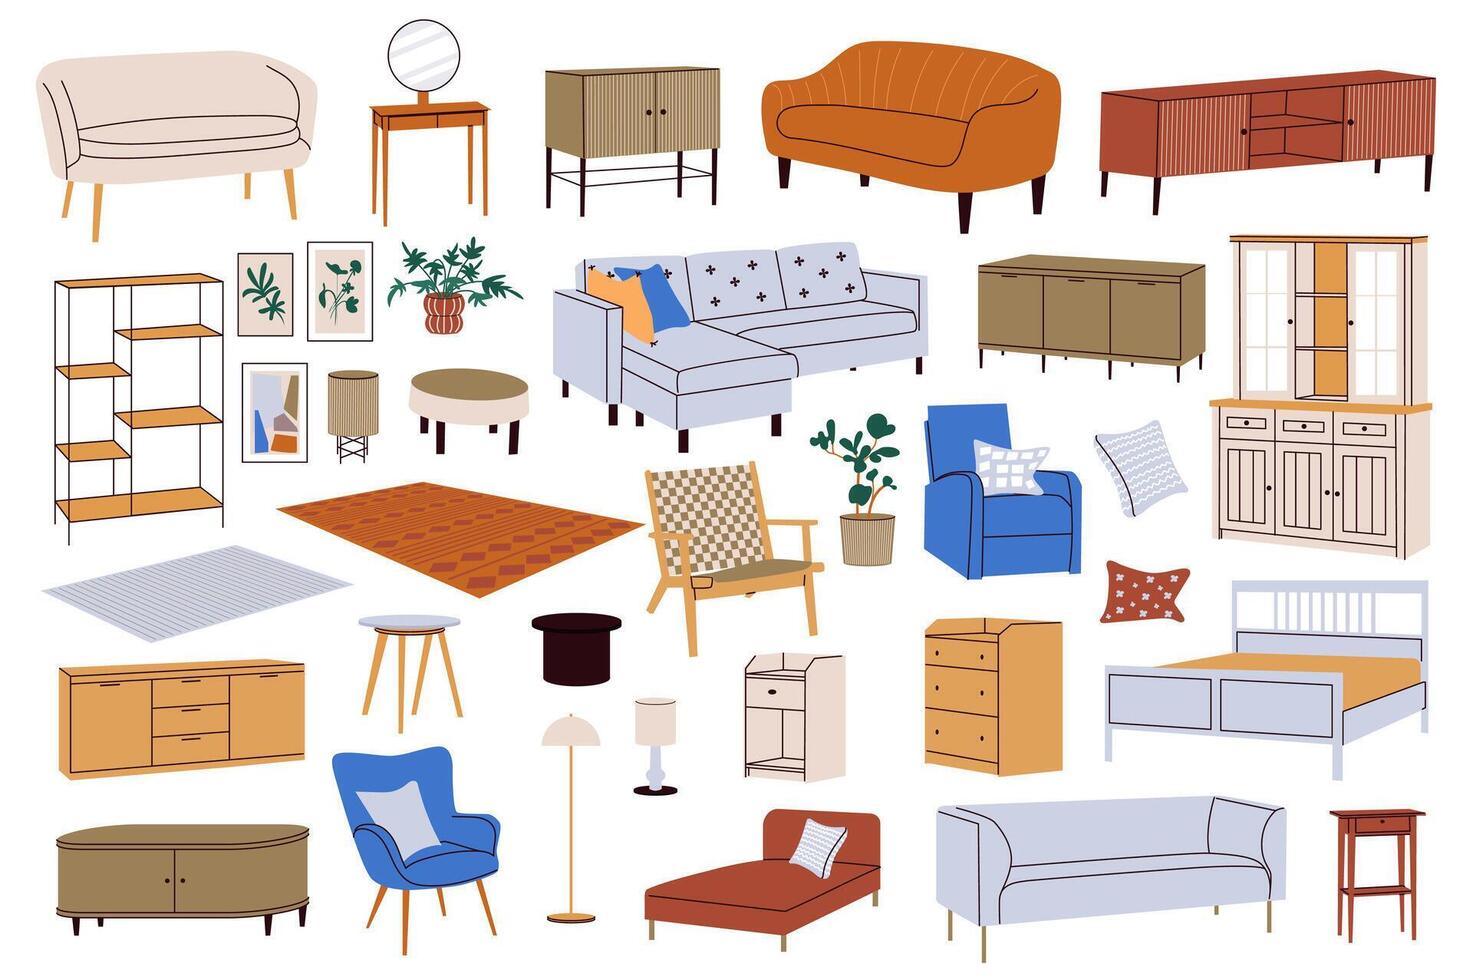 Interior furniture mega set in flat design. Bundle elements of different types of sofas, tables, bookcases, paintings, armchairs, lamps, pillows, other. Vector illustration isolated graphic objects